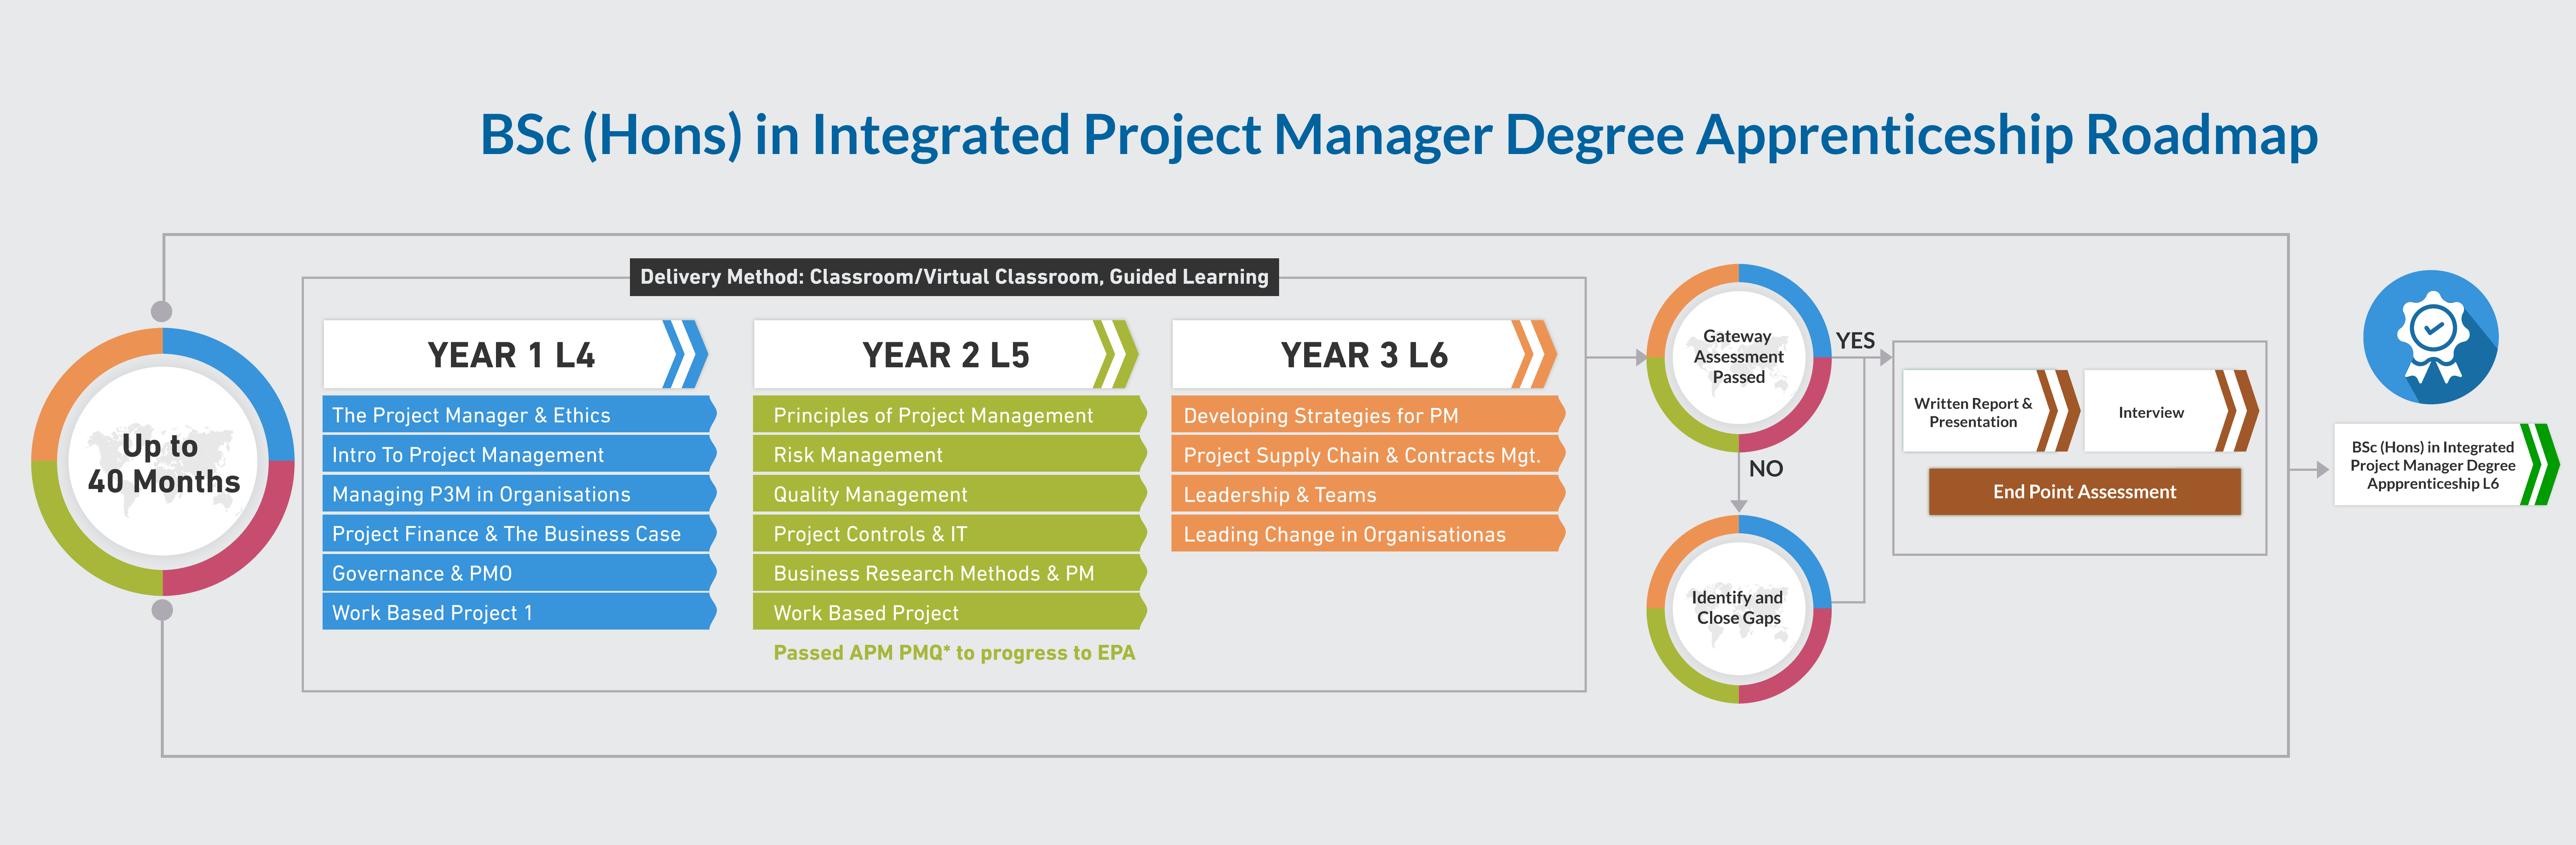 What is a project management degree?